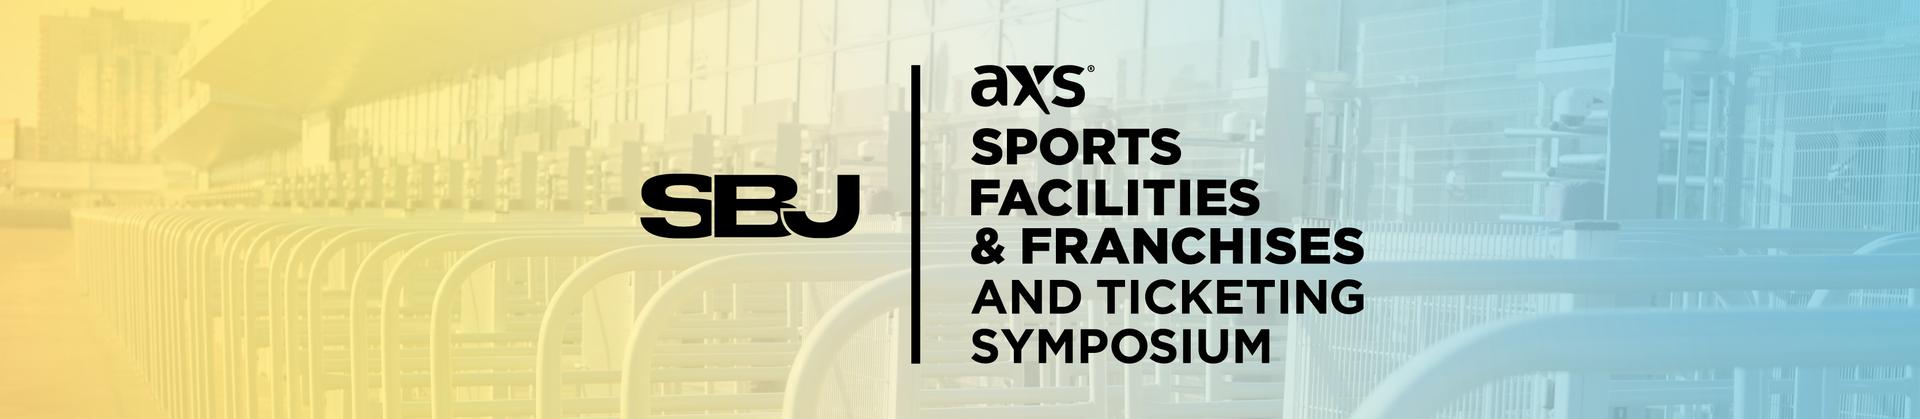 AXS Sports Facilities & Franchises and Ticketing Symposium